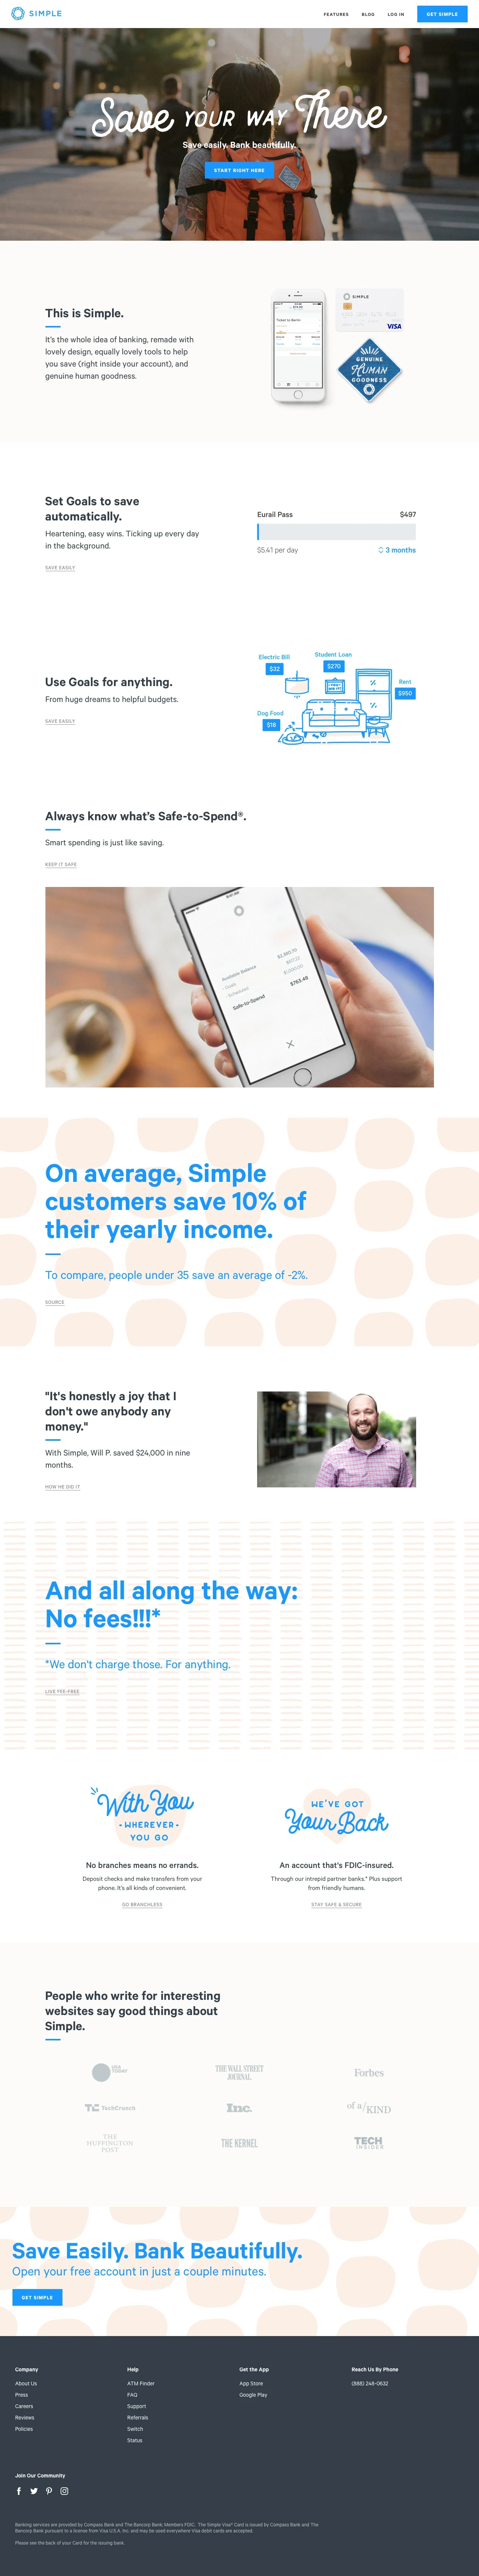 Simple Landing Page Example: Simple is reinventing online banking with modern web and mobile experiences, no surprise fees, and great customer service. Simplify your finances.